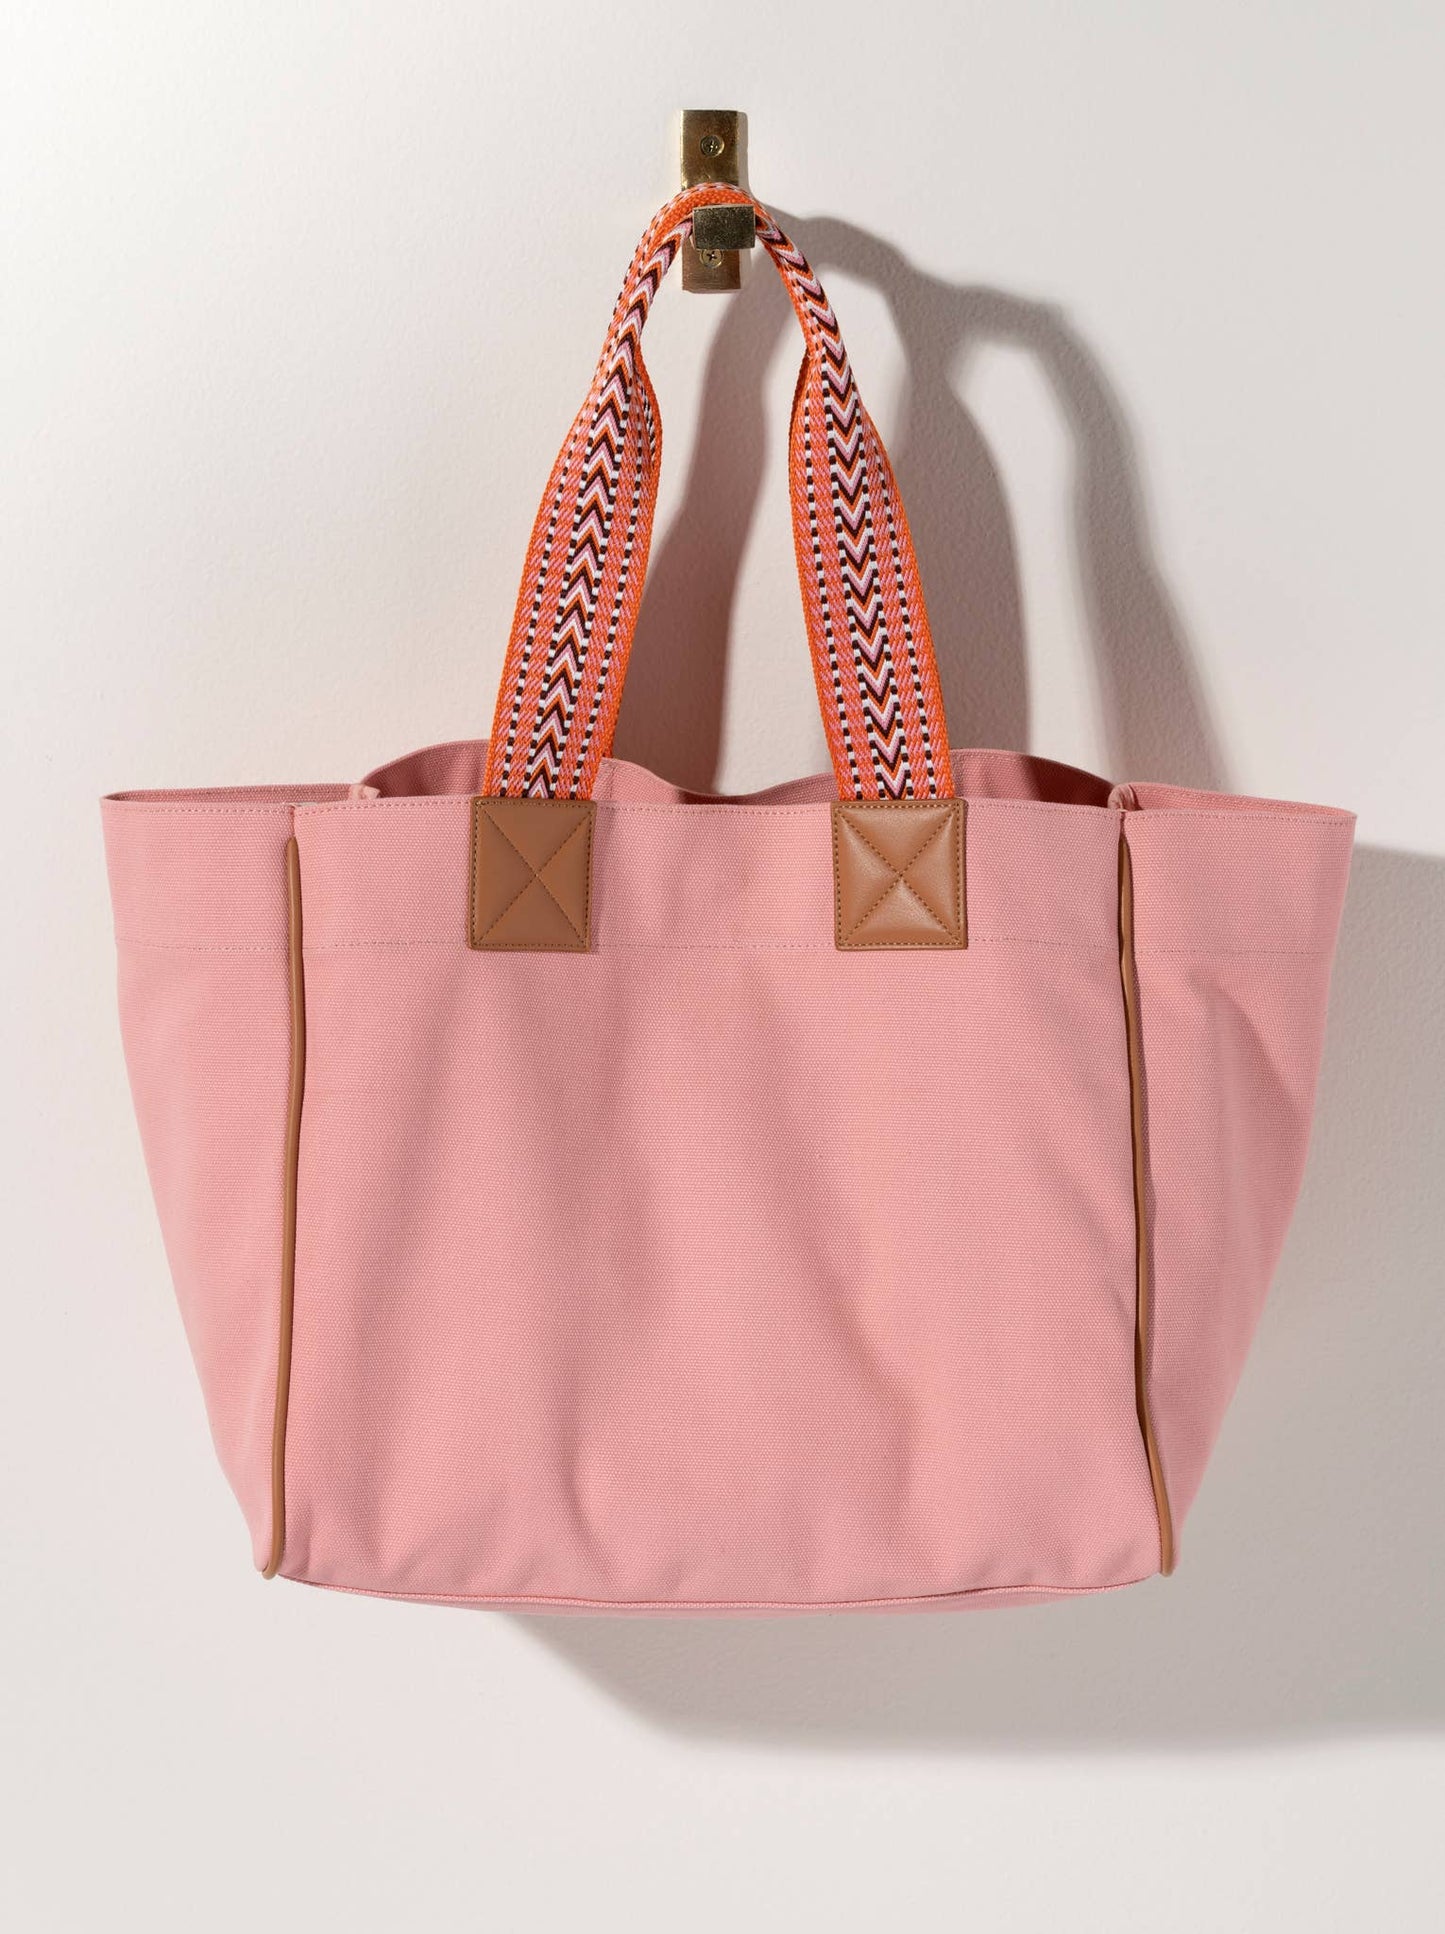 LIDO CARRYALL TOTE: Pink